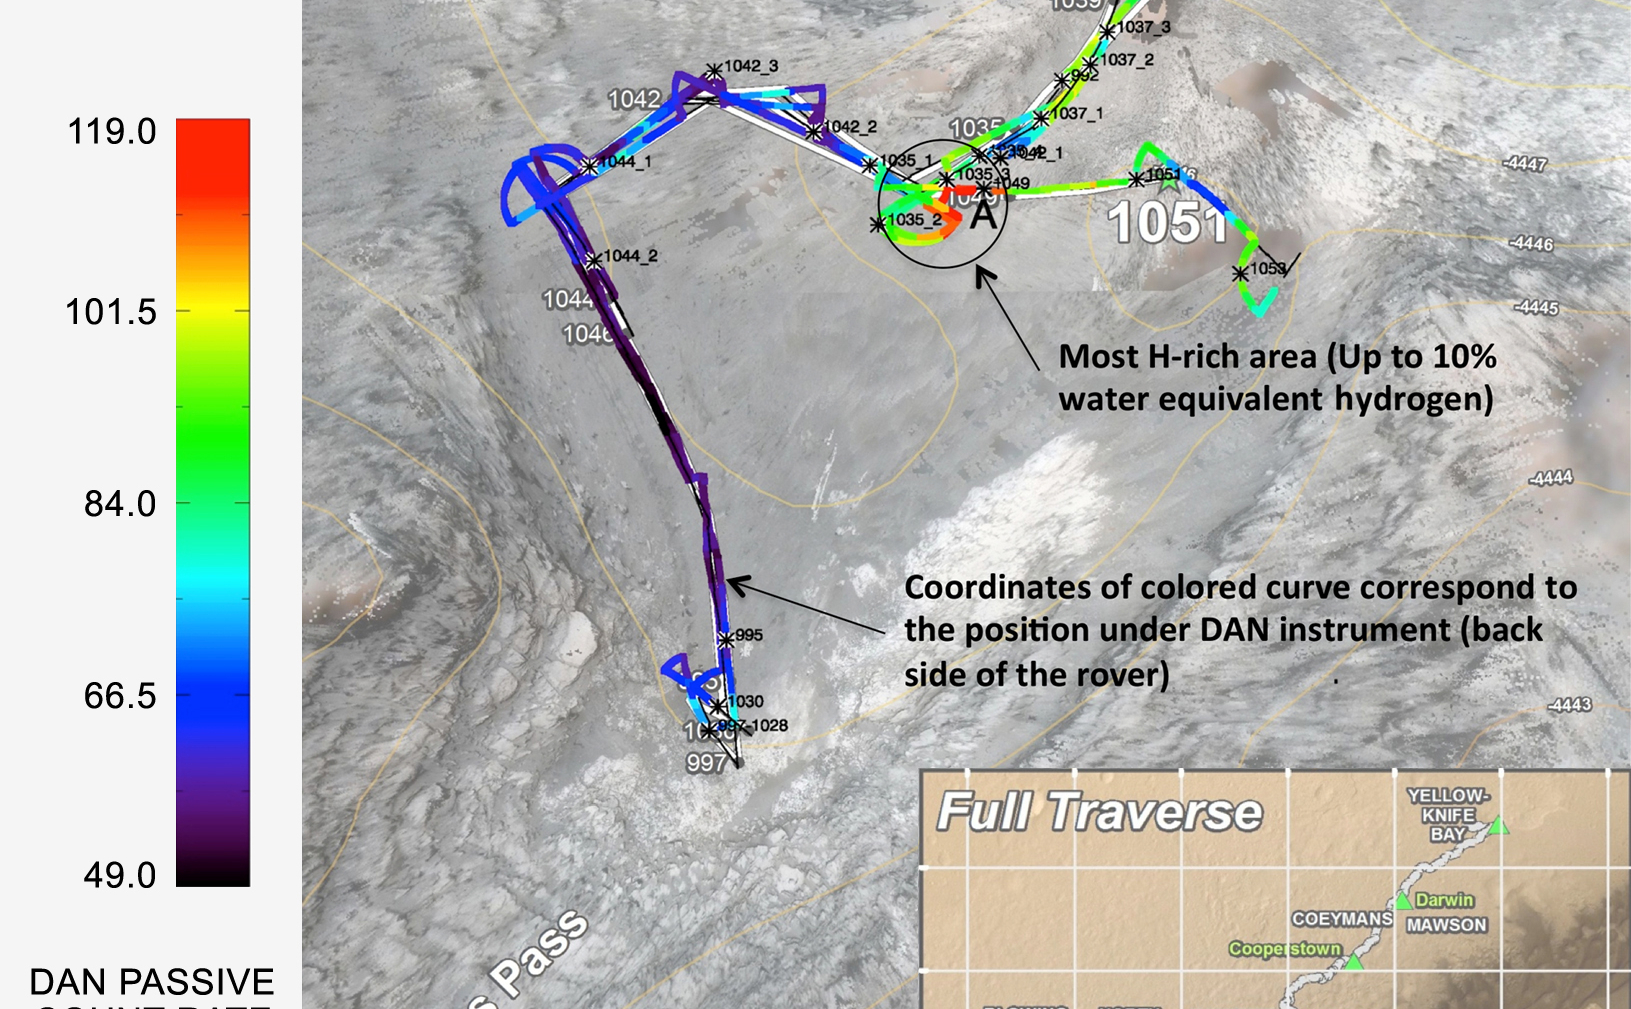 Curiosity's DAN instrument for checking hydration levels in the ground beneath the rover detected an unusually high amount at a site near "Marias Pass," prompting repeated passes over the area to map the hydrogen amounts. This map shows color-coded results from multiple traverses over the area.